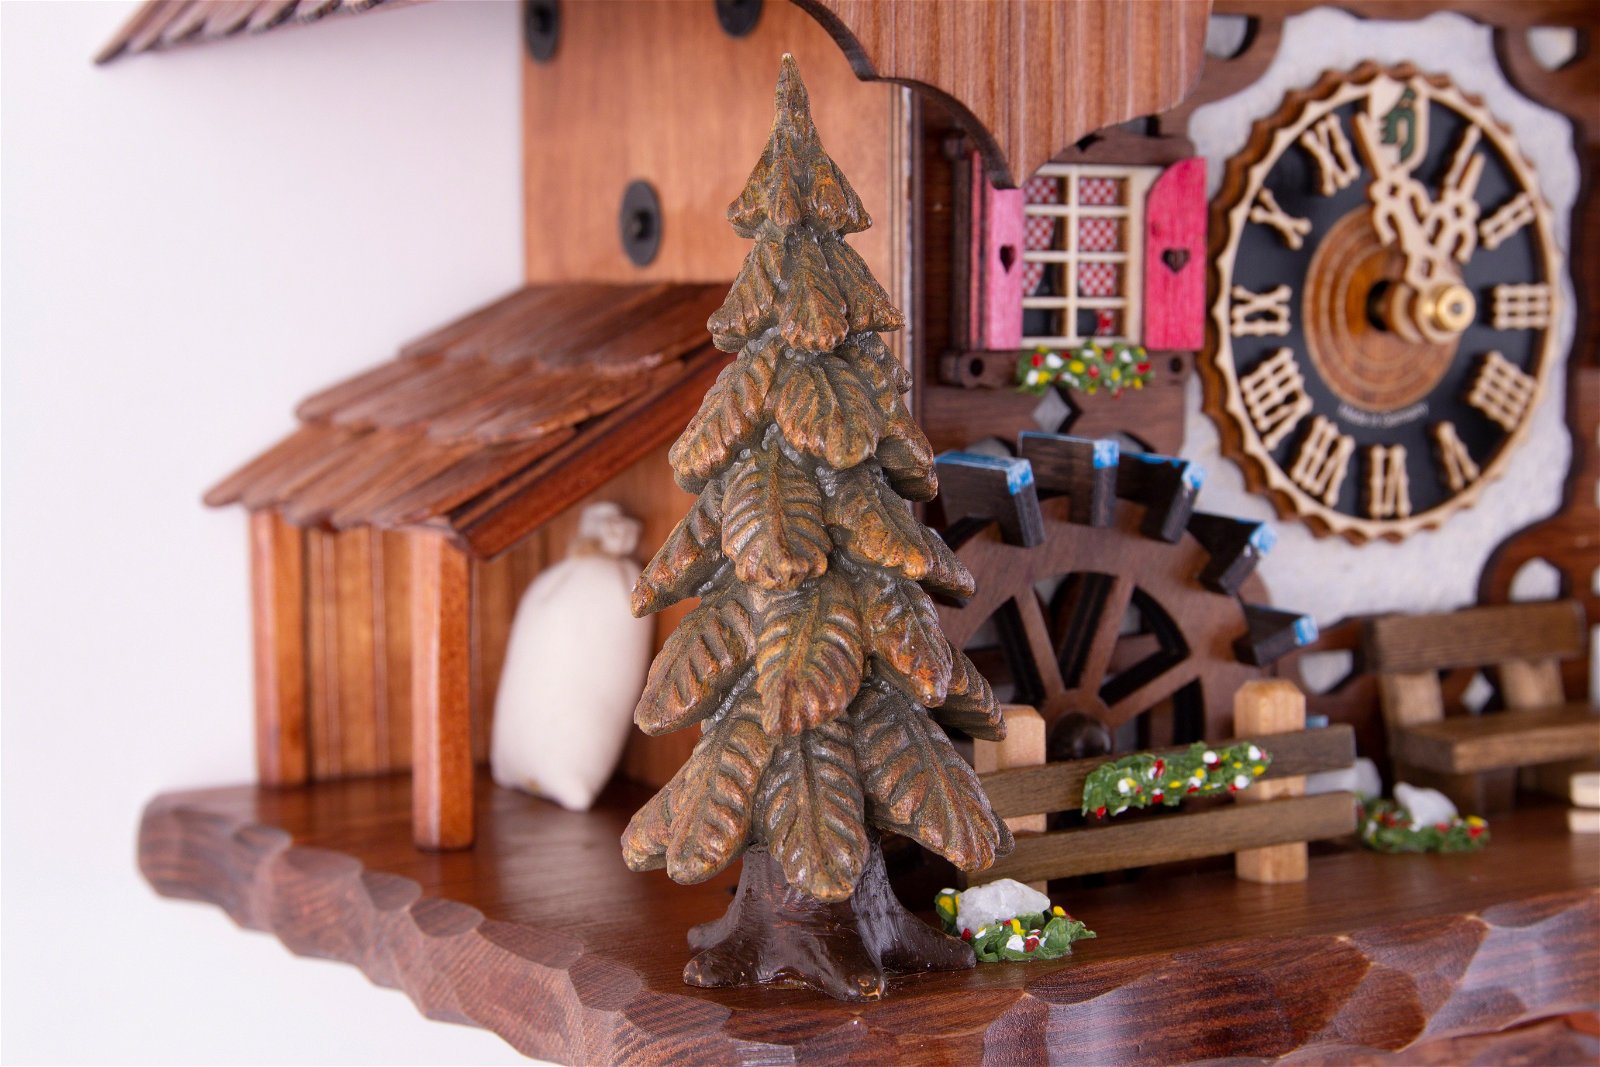 Cuckoo Clock Chalet Style 8 Day Movement 40cm by Hönes